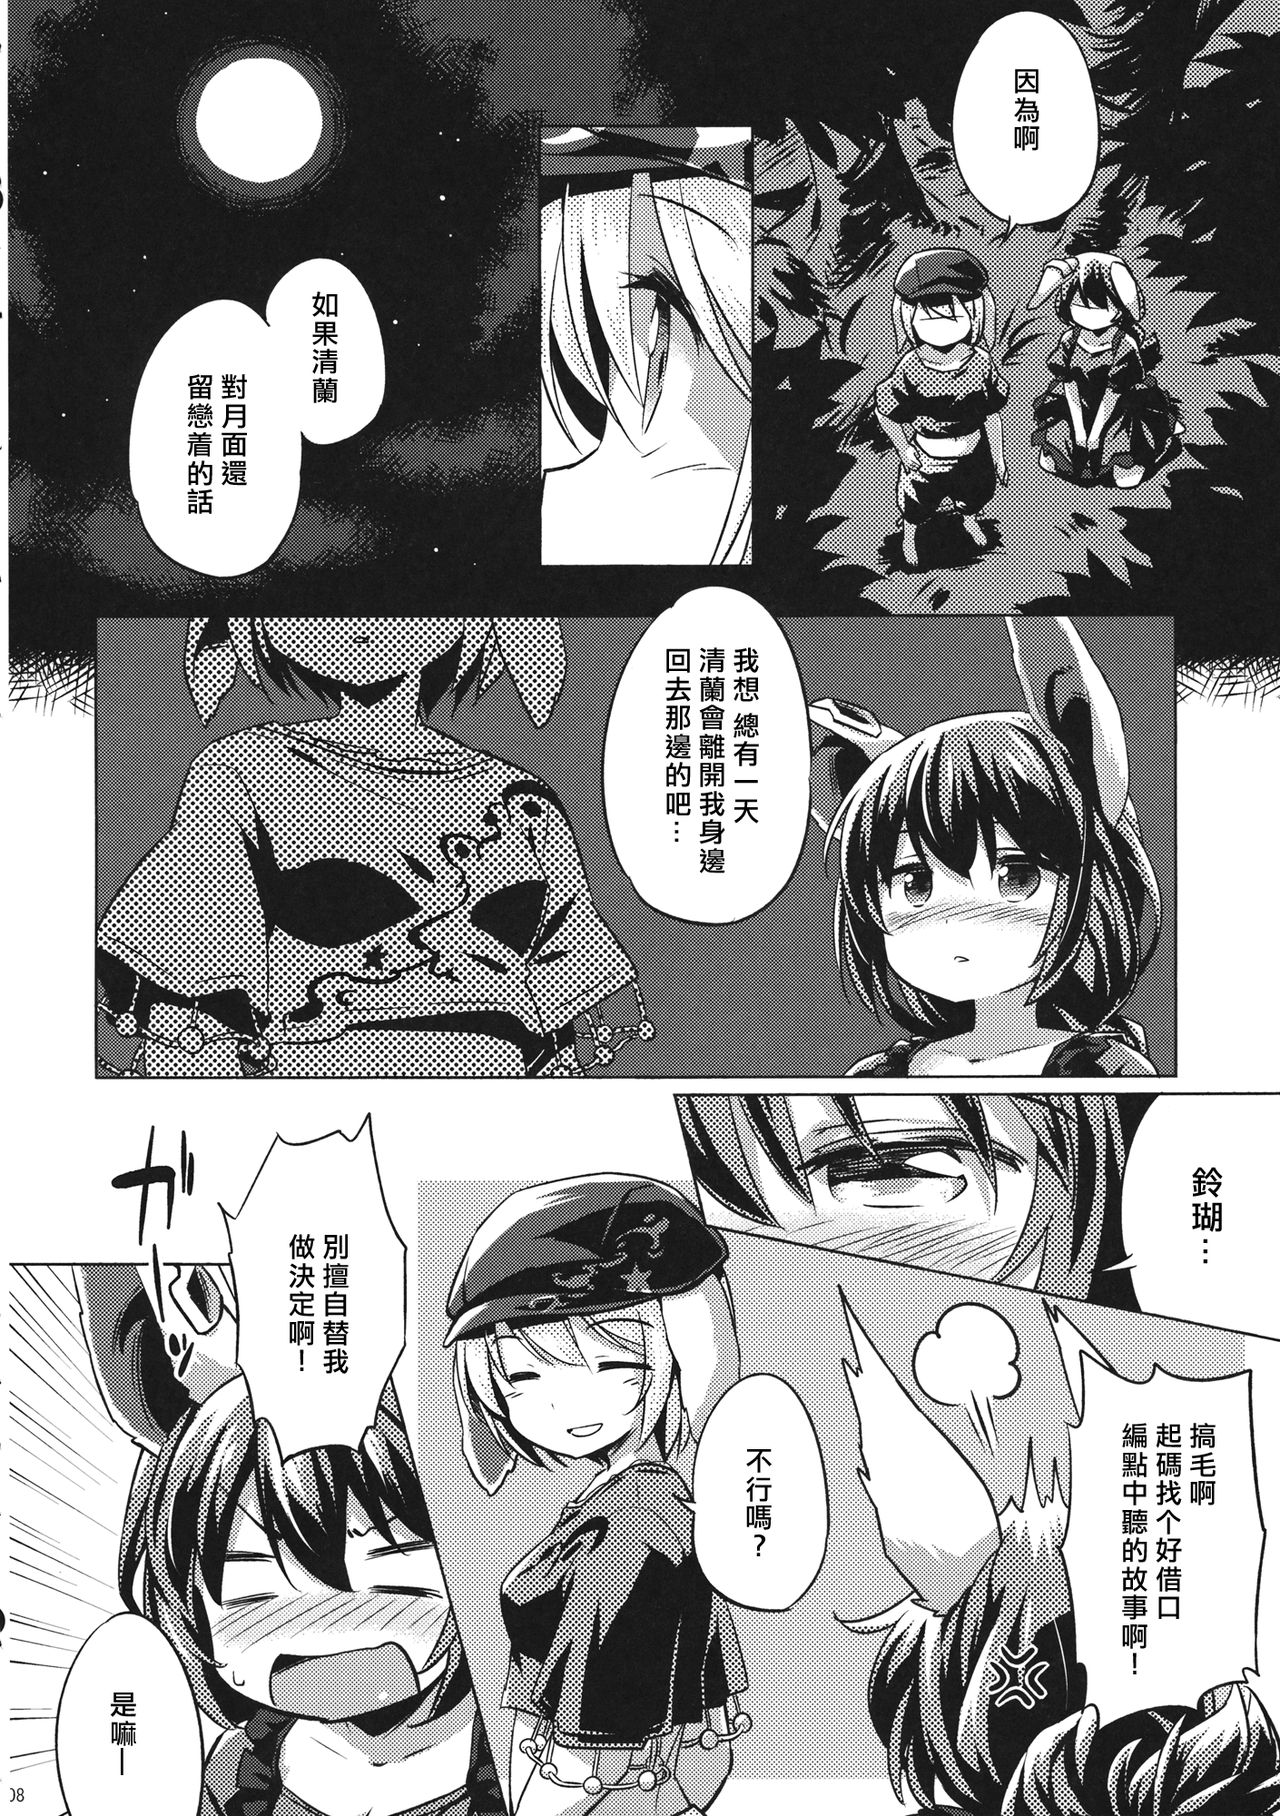 (C89) [Animal Passion (Yude Pea)] Sourou Seiran (Touhou Project) [Chinese] [冴月麟个人汉化] (C89) [Animal Passion (茹でピー)] 早漏精蘭 (東方Project) [中国翻訳]